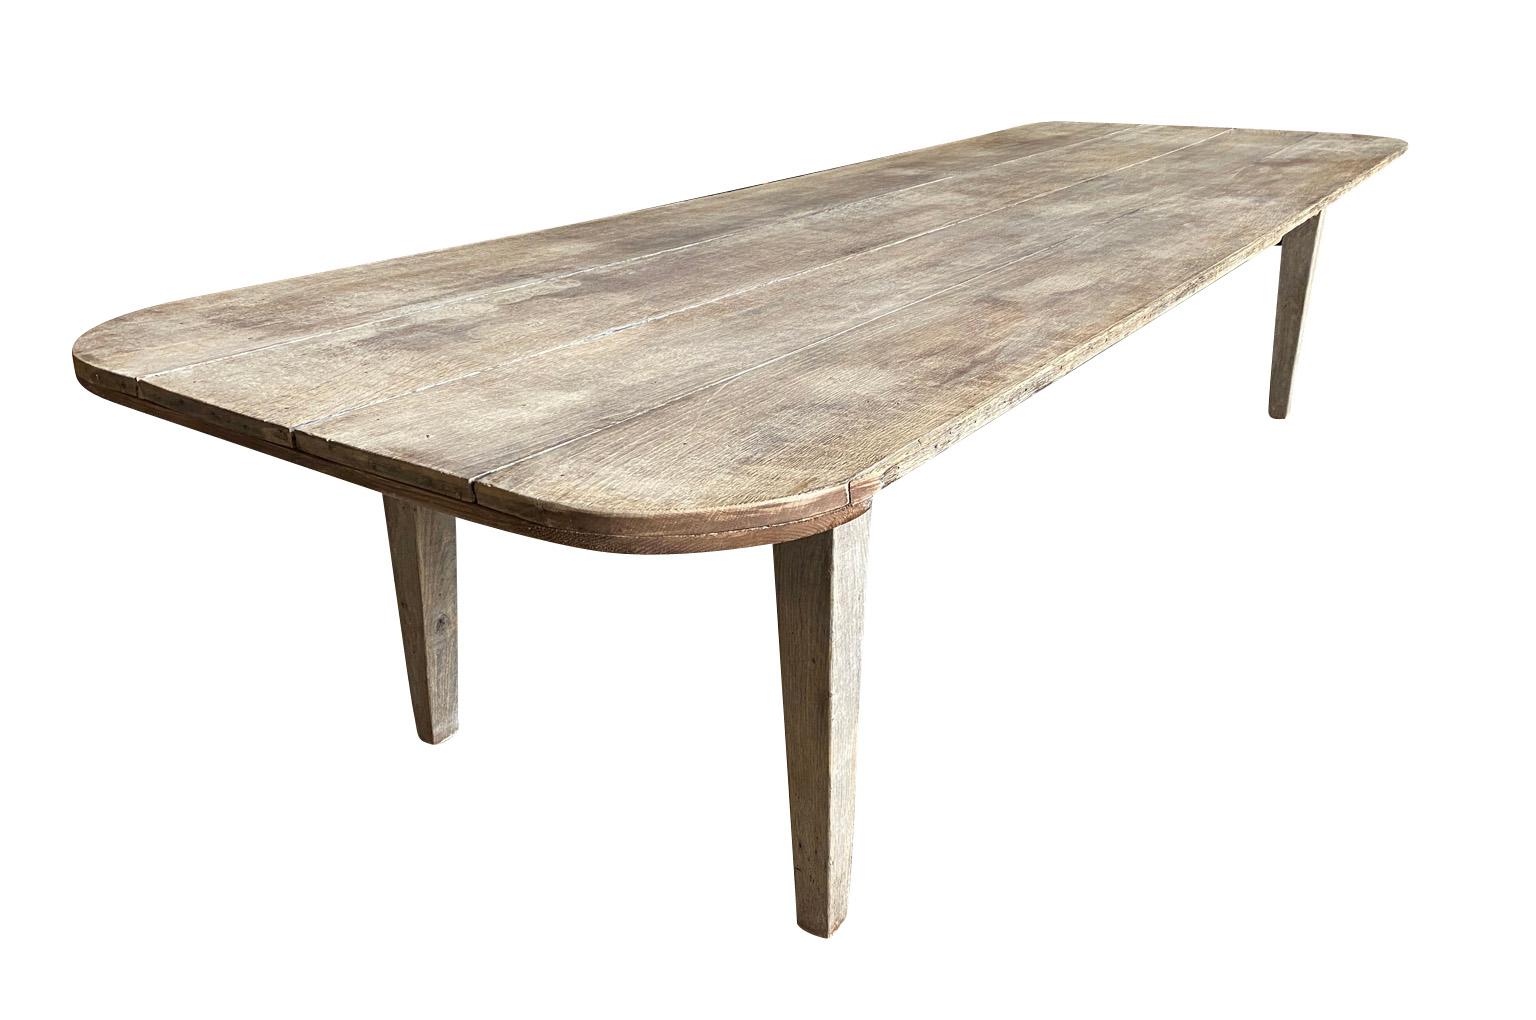 A very beautiful 19th century Farm Table from the Provence region of France. Soundly constructed from naturally washed oak. Very sturdy. A wonderful large scale - perfect for large family gatherings.